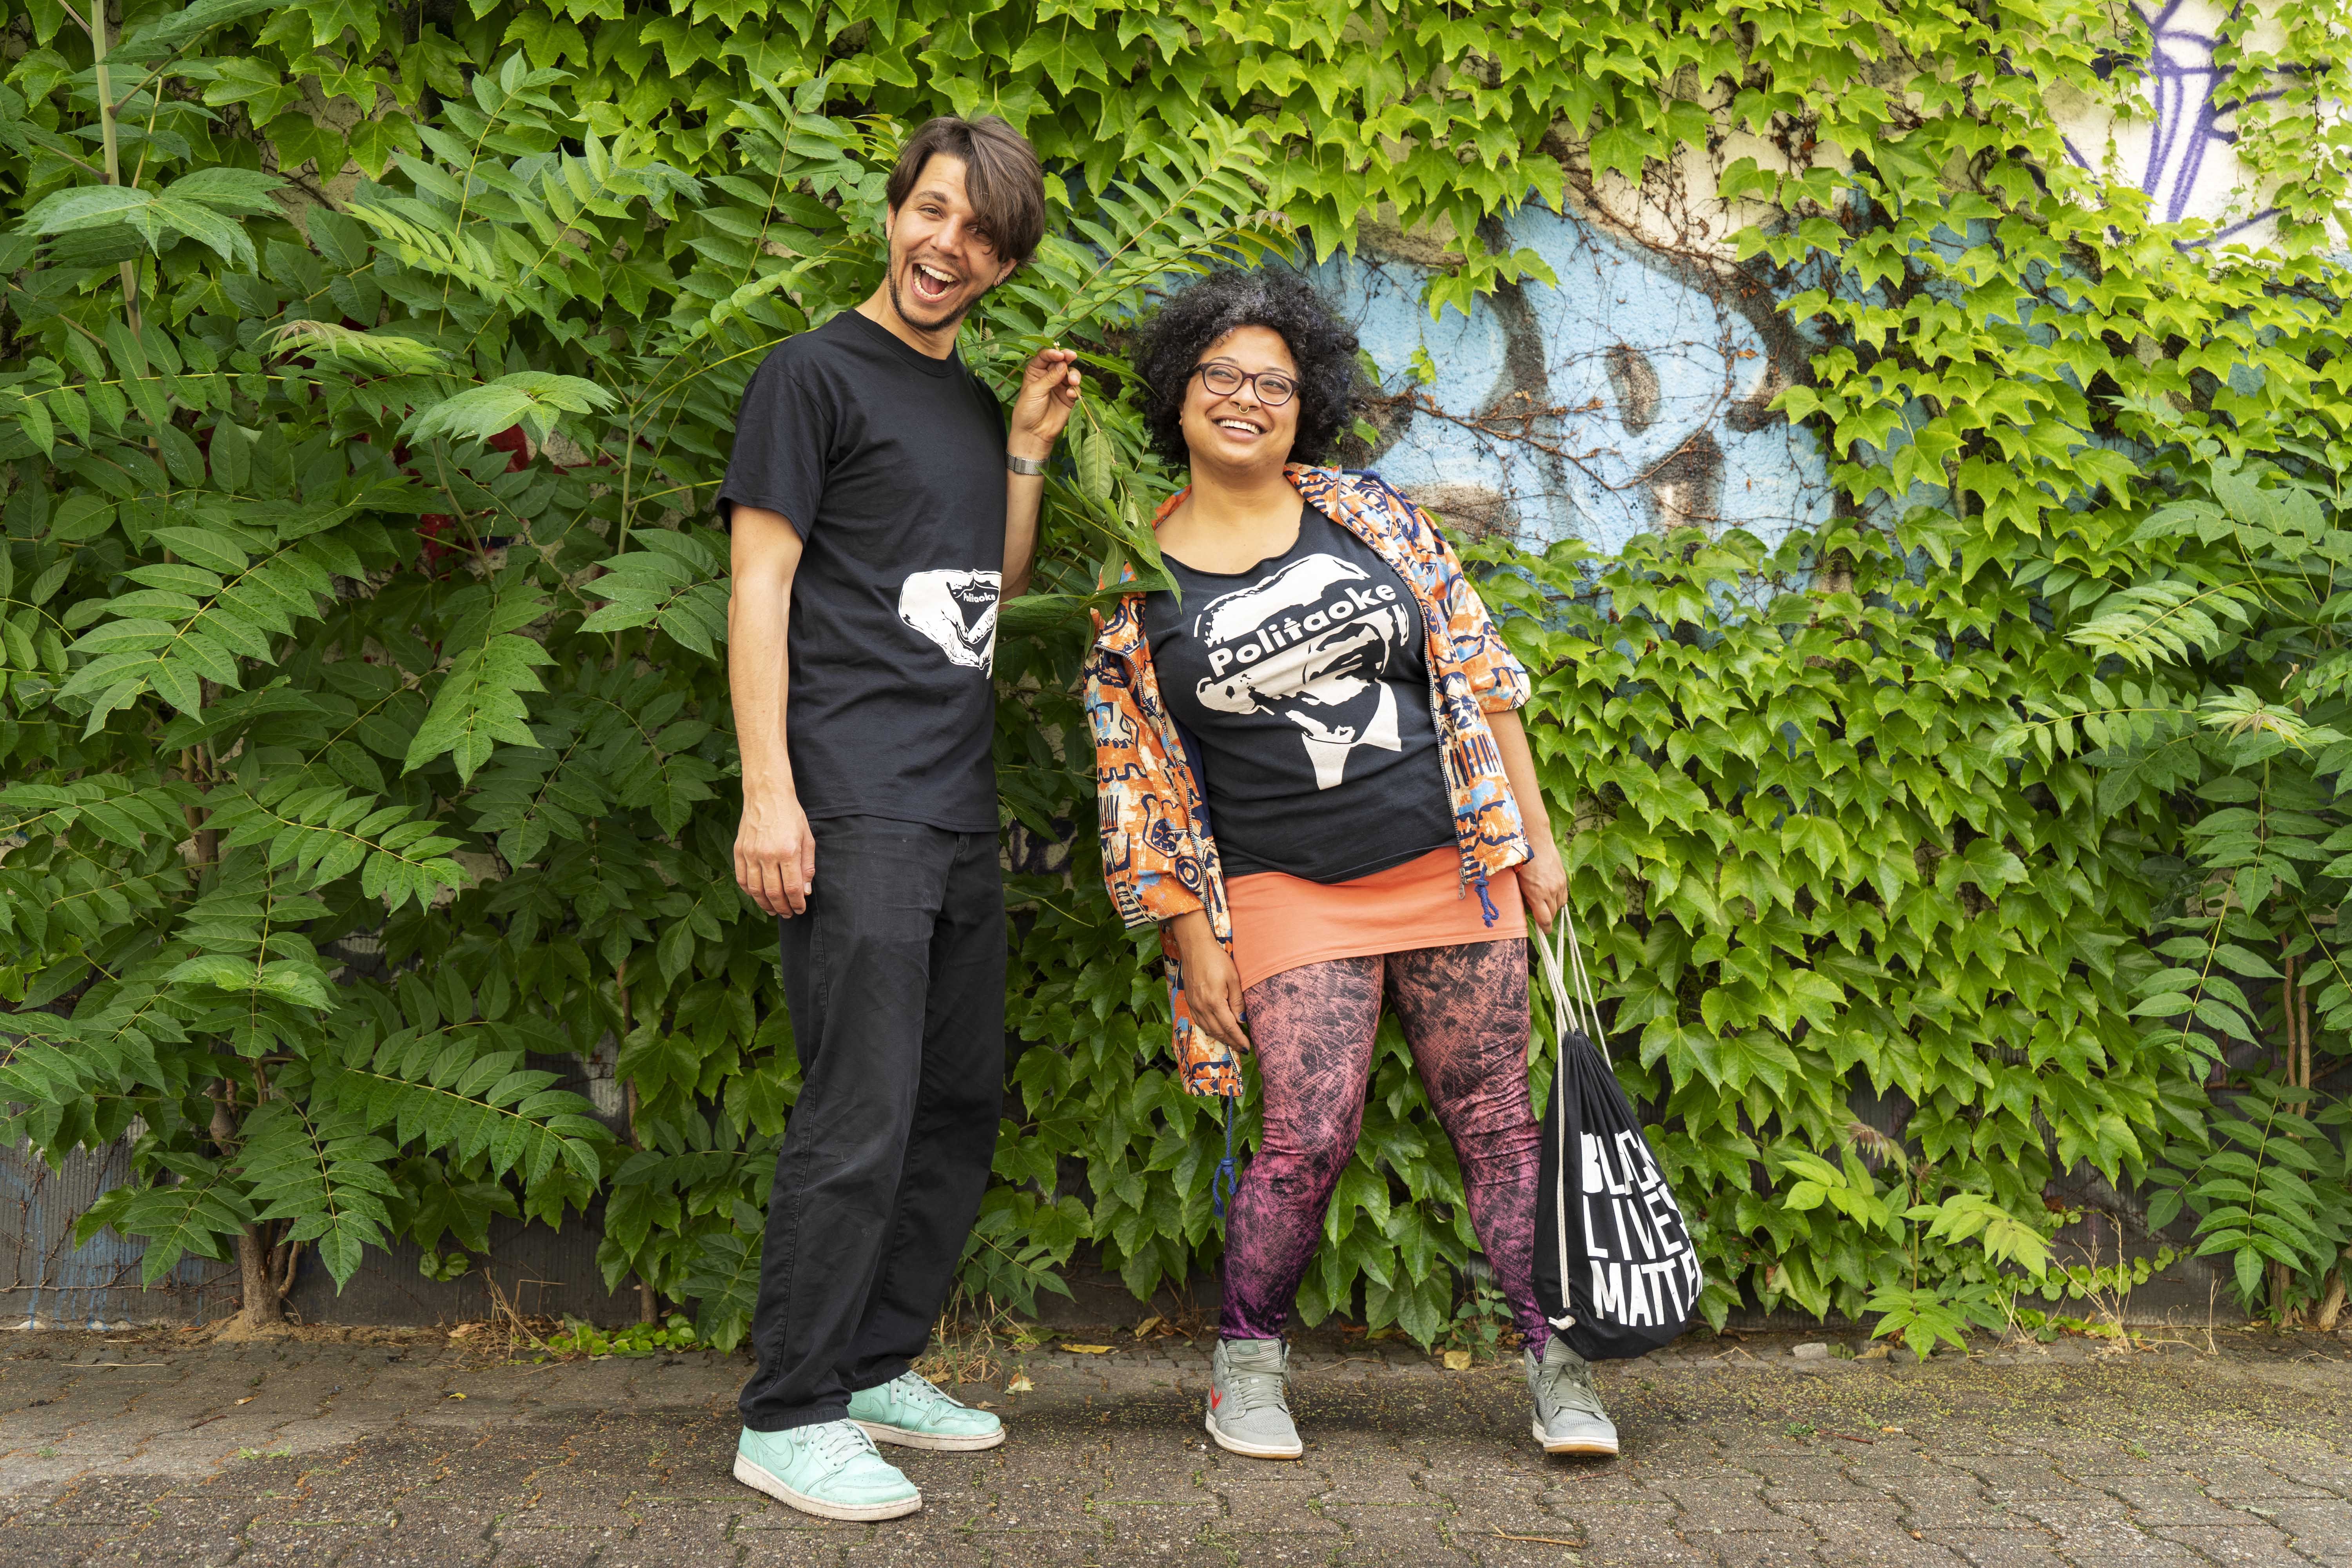 Portrait photo of Diana Arce and Simon Schultz, participants of the residence project "Neue Heimat on the road".